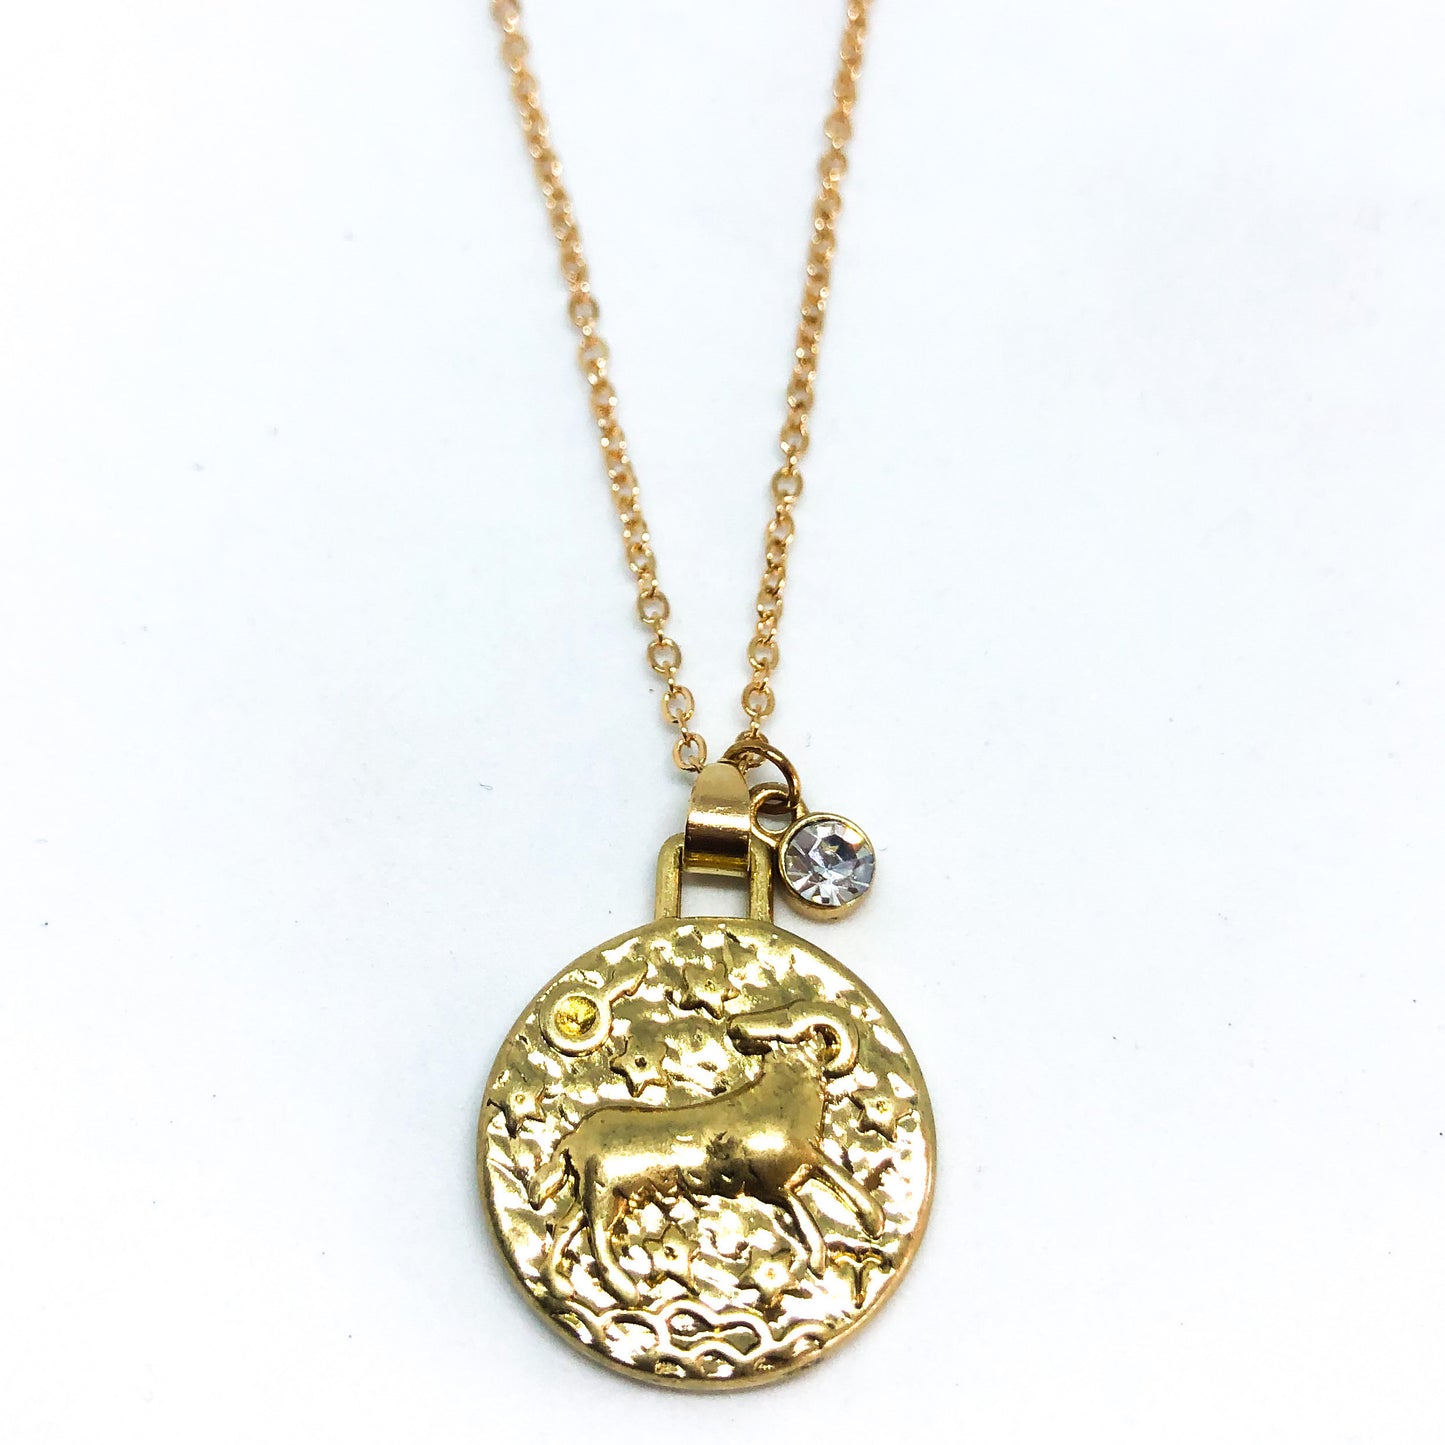 “What’s Your Sign?” Zodiac Necklace - Love & Light Jewels